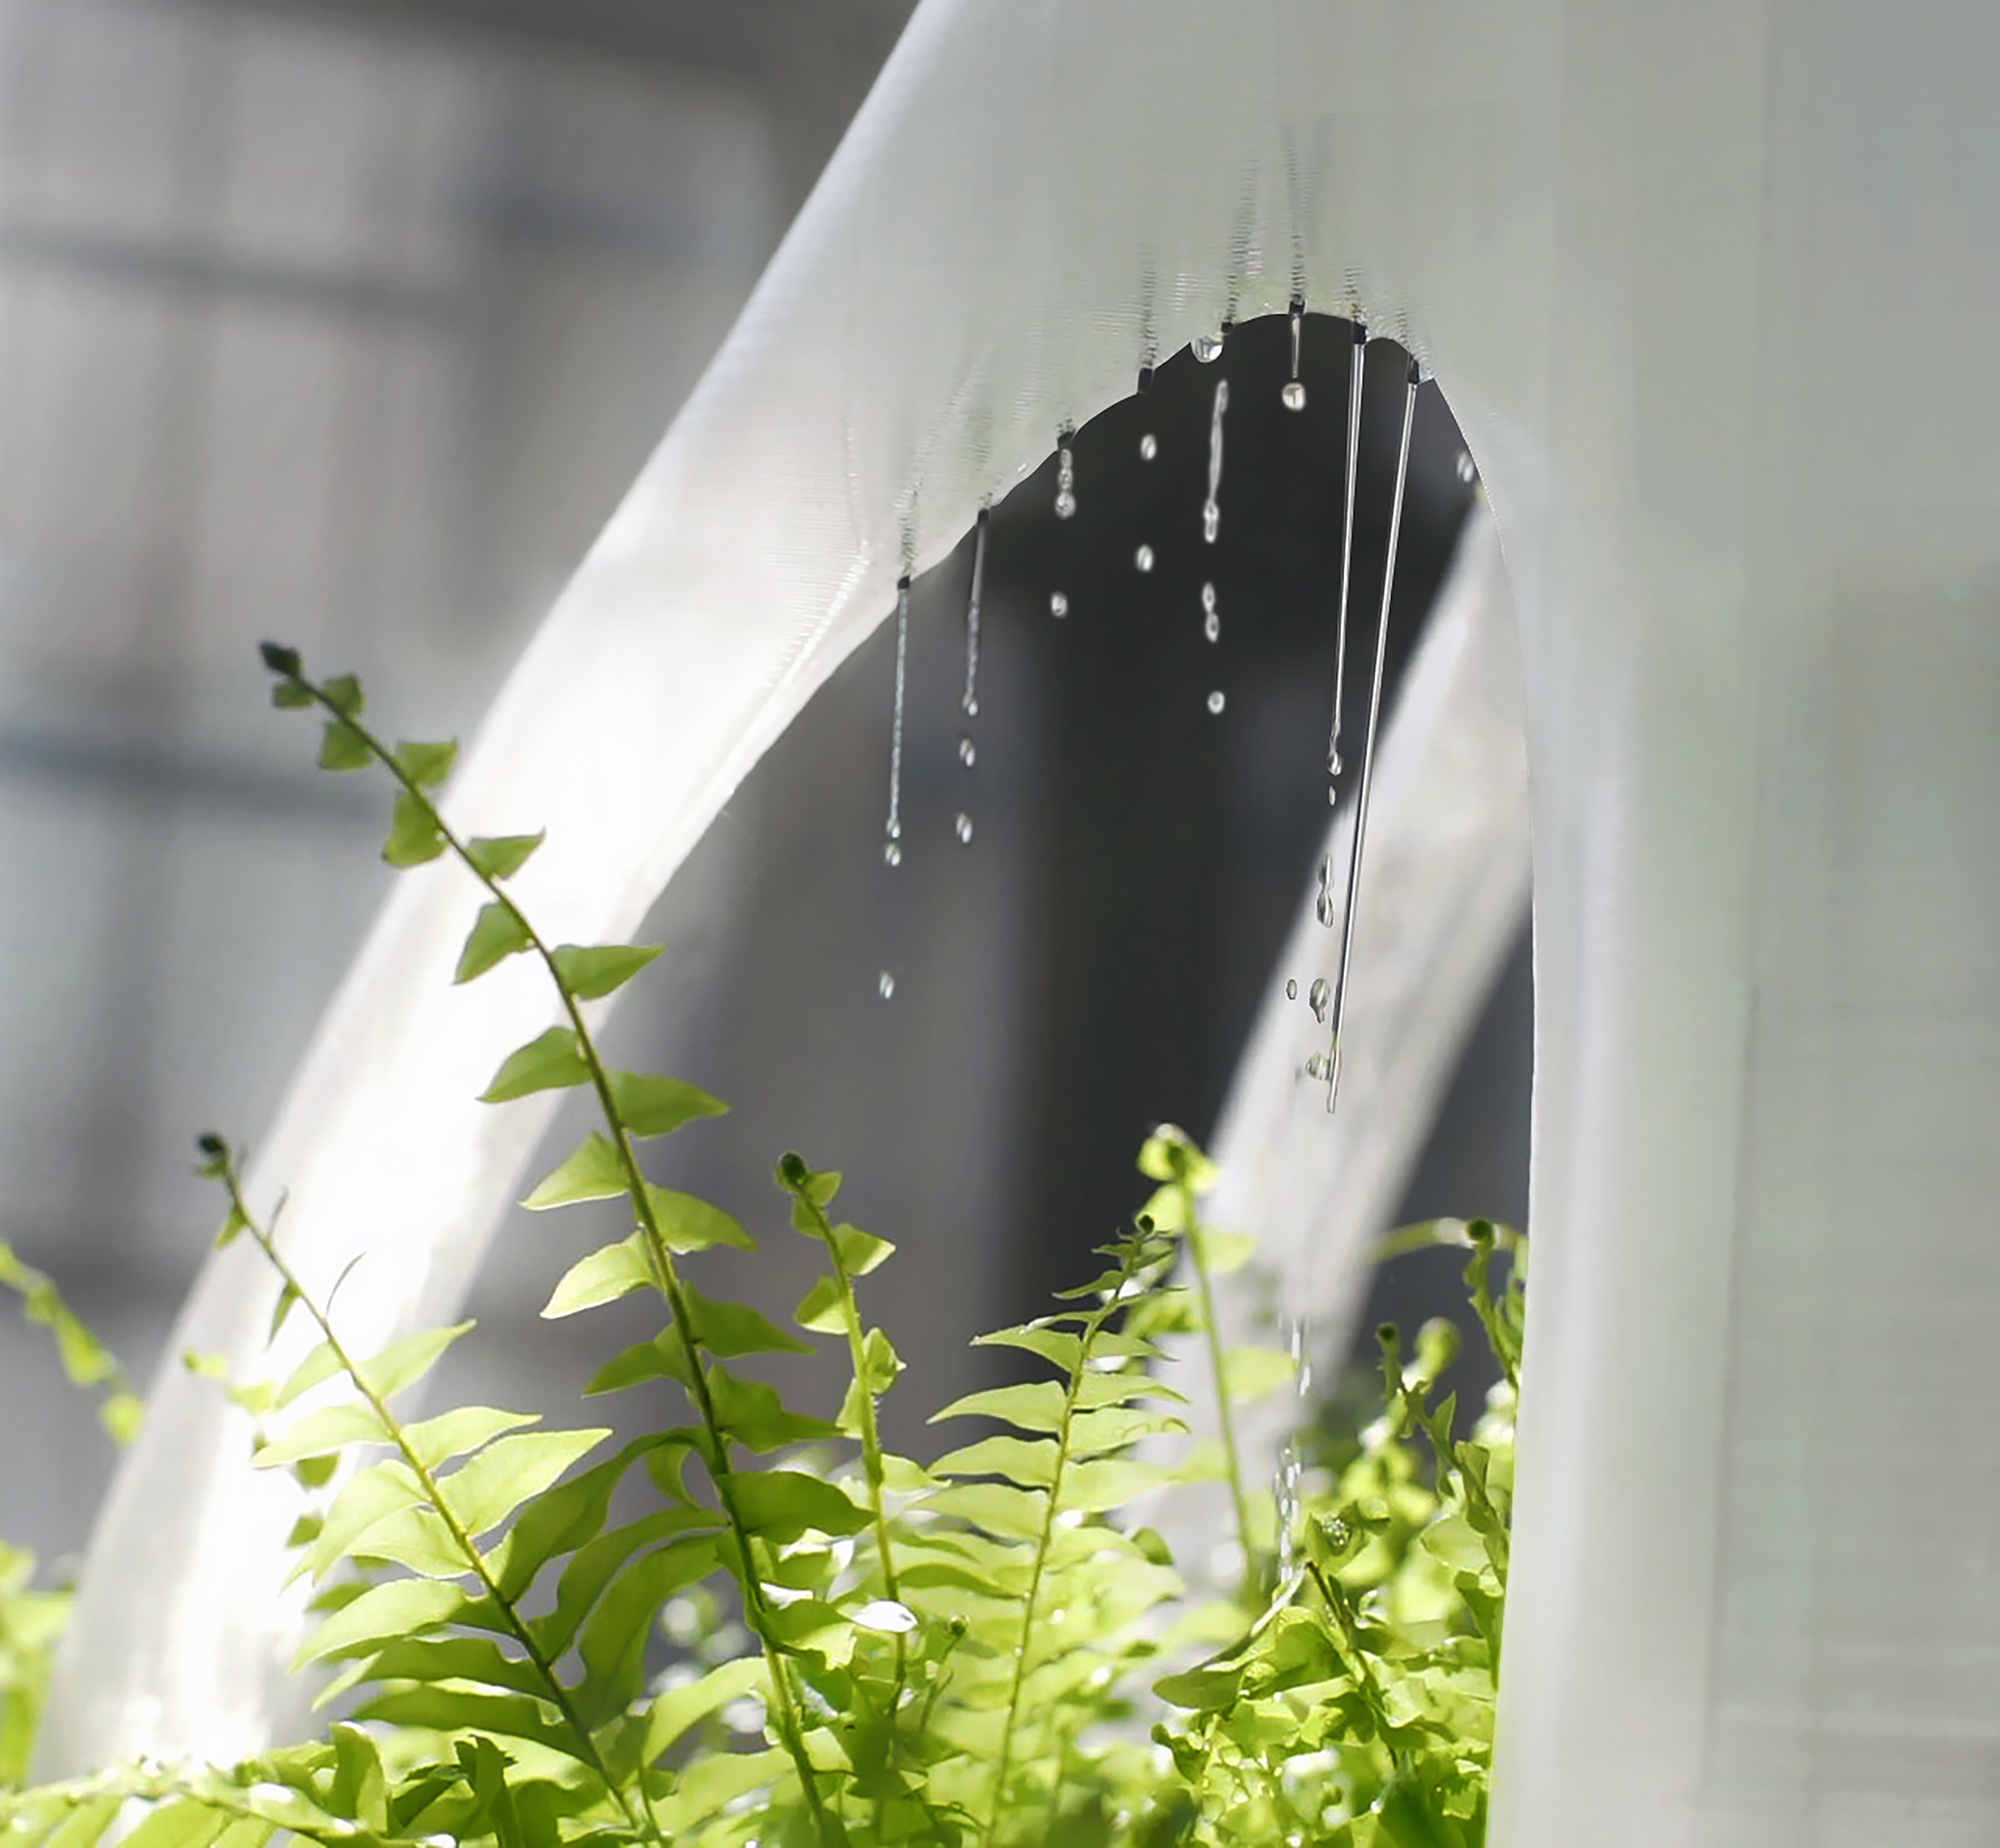 Details of sprinkling water from the BANYAN ECO WALL by BigRep. Image via BigRep.